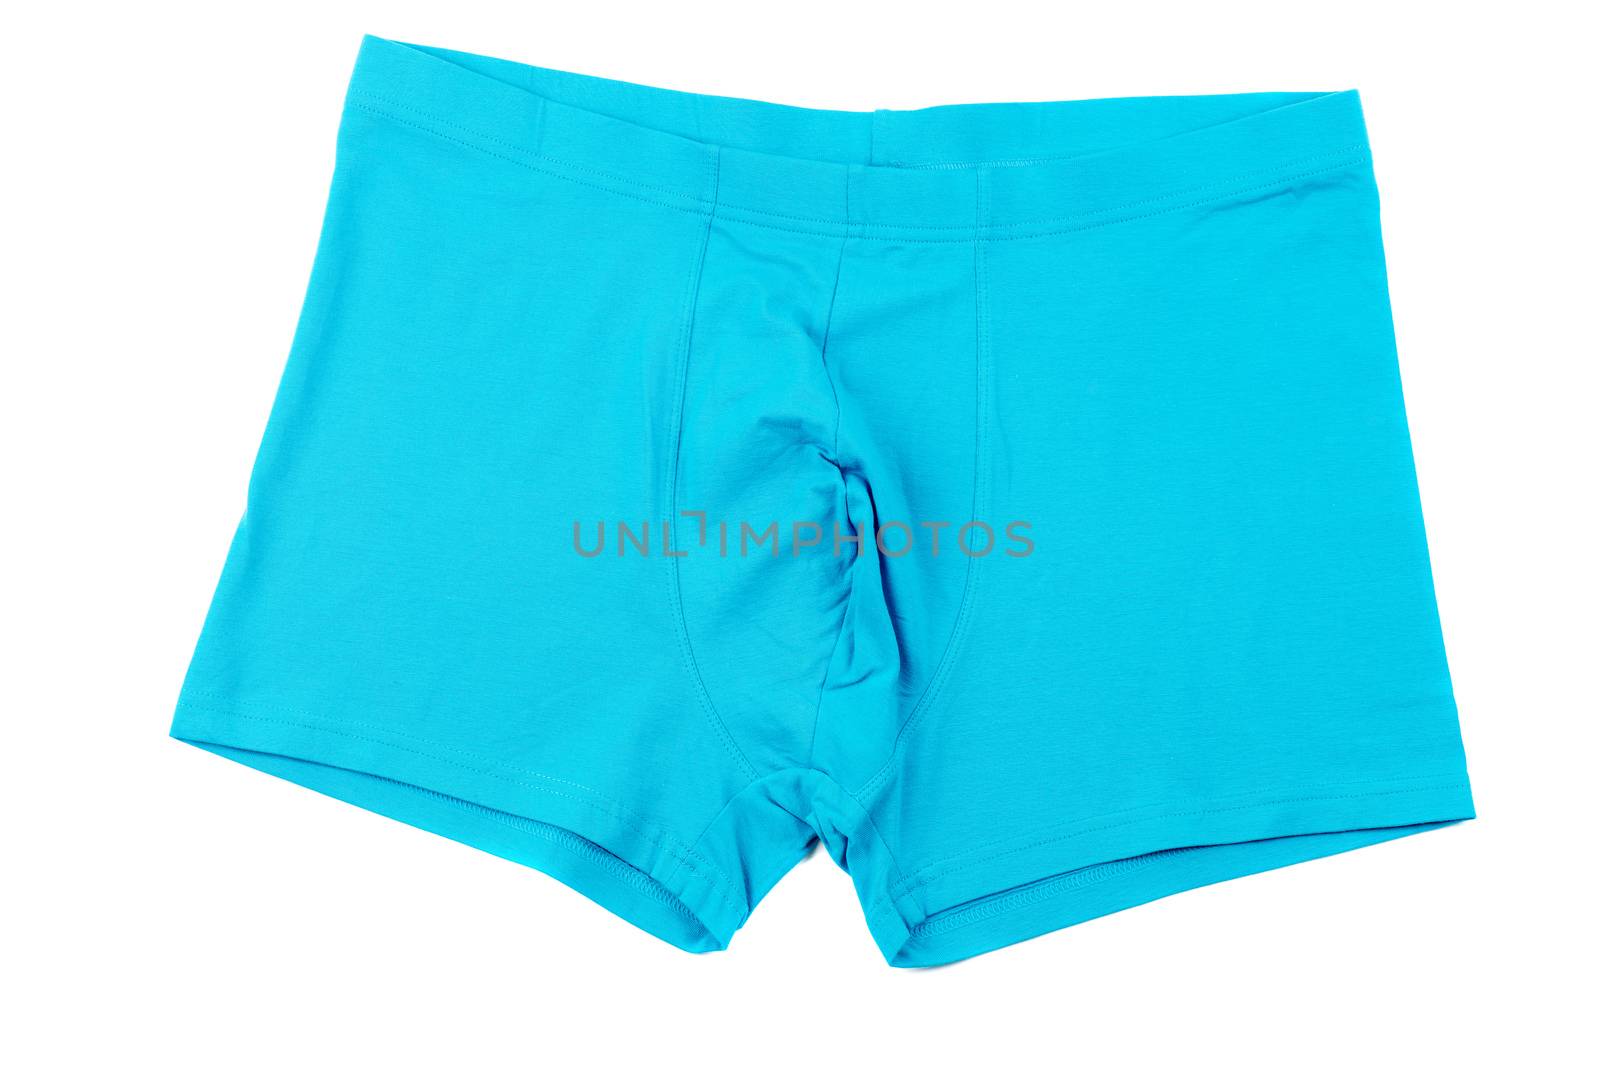 Blue men's Boxer briefs isolated on a white background